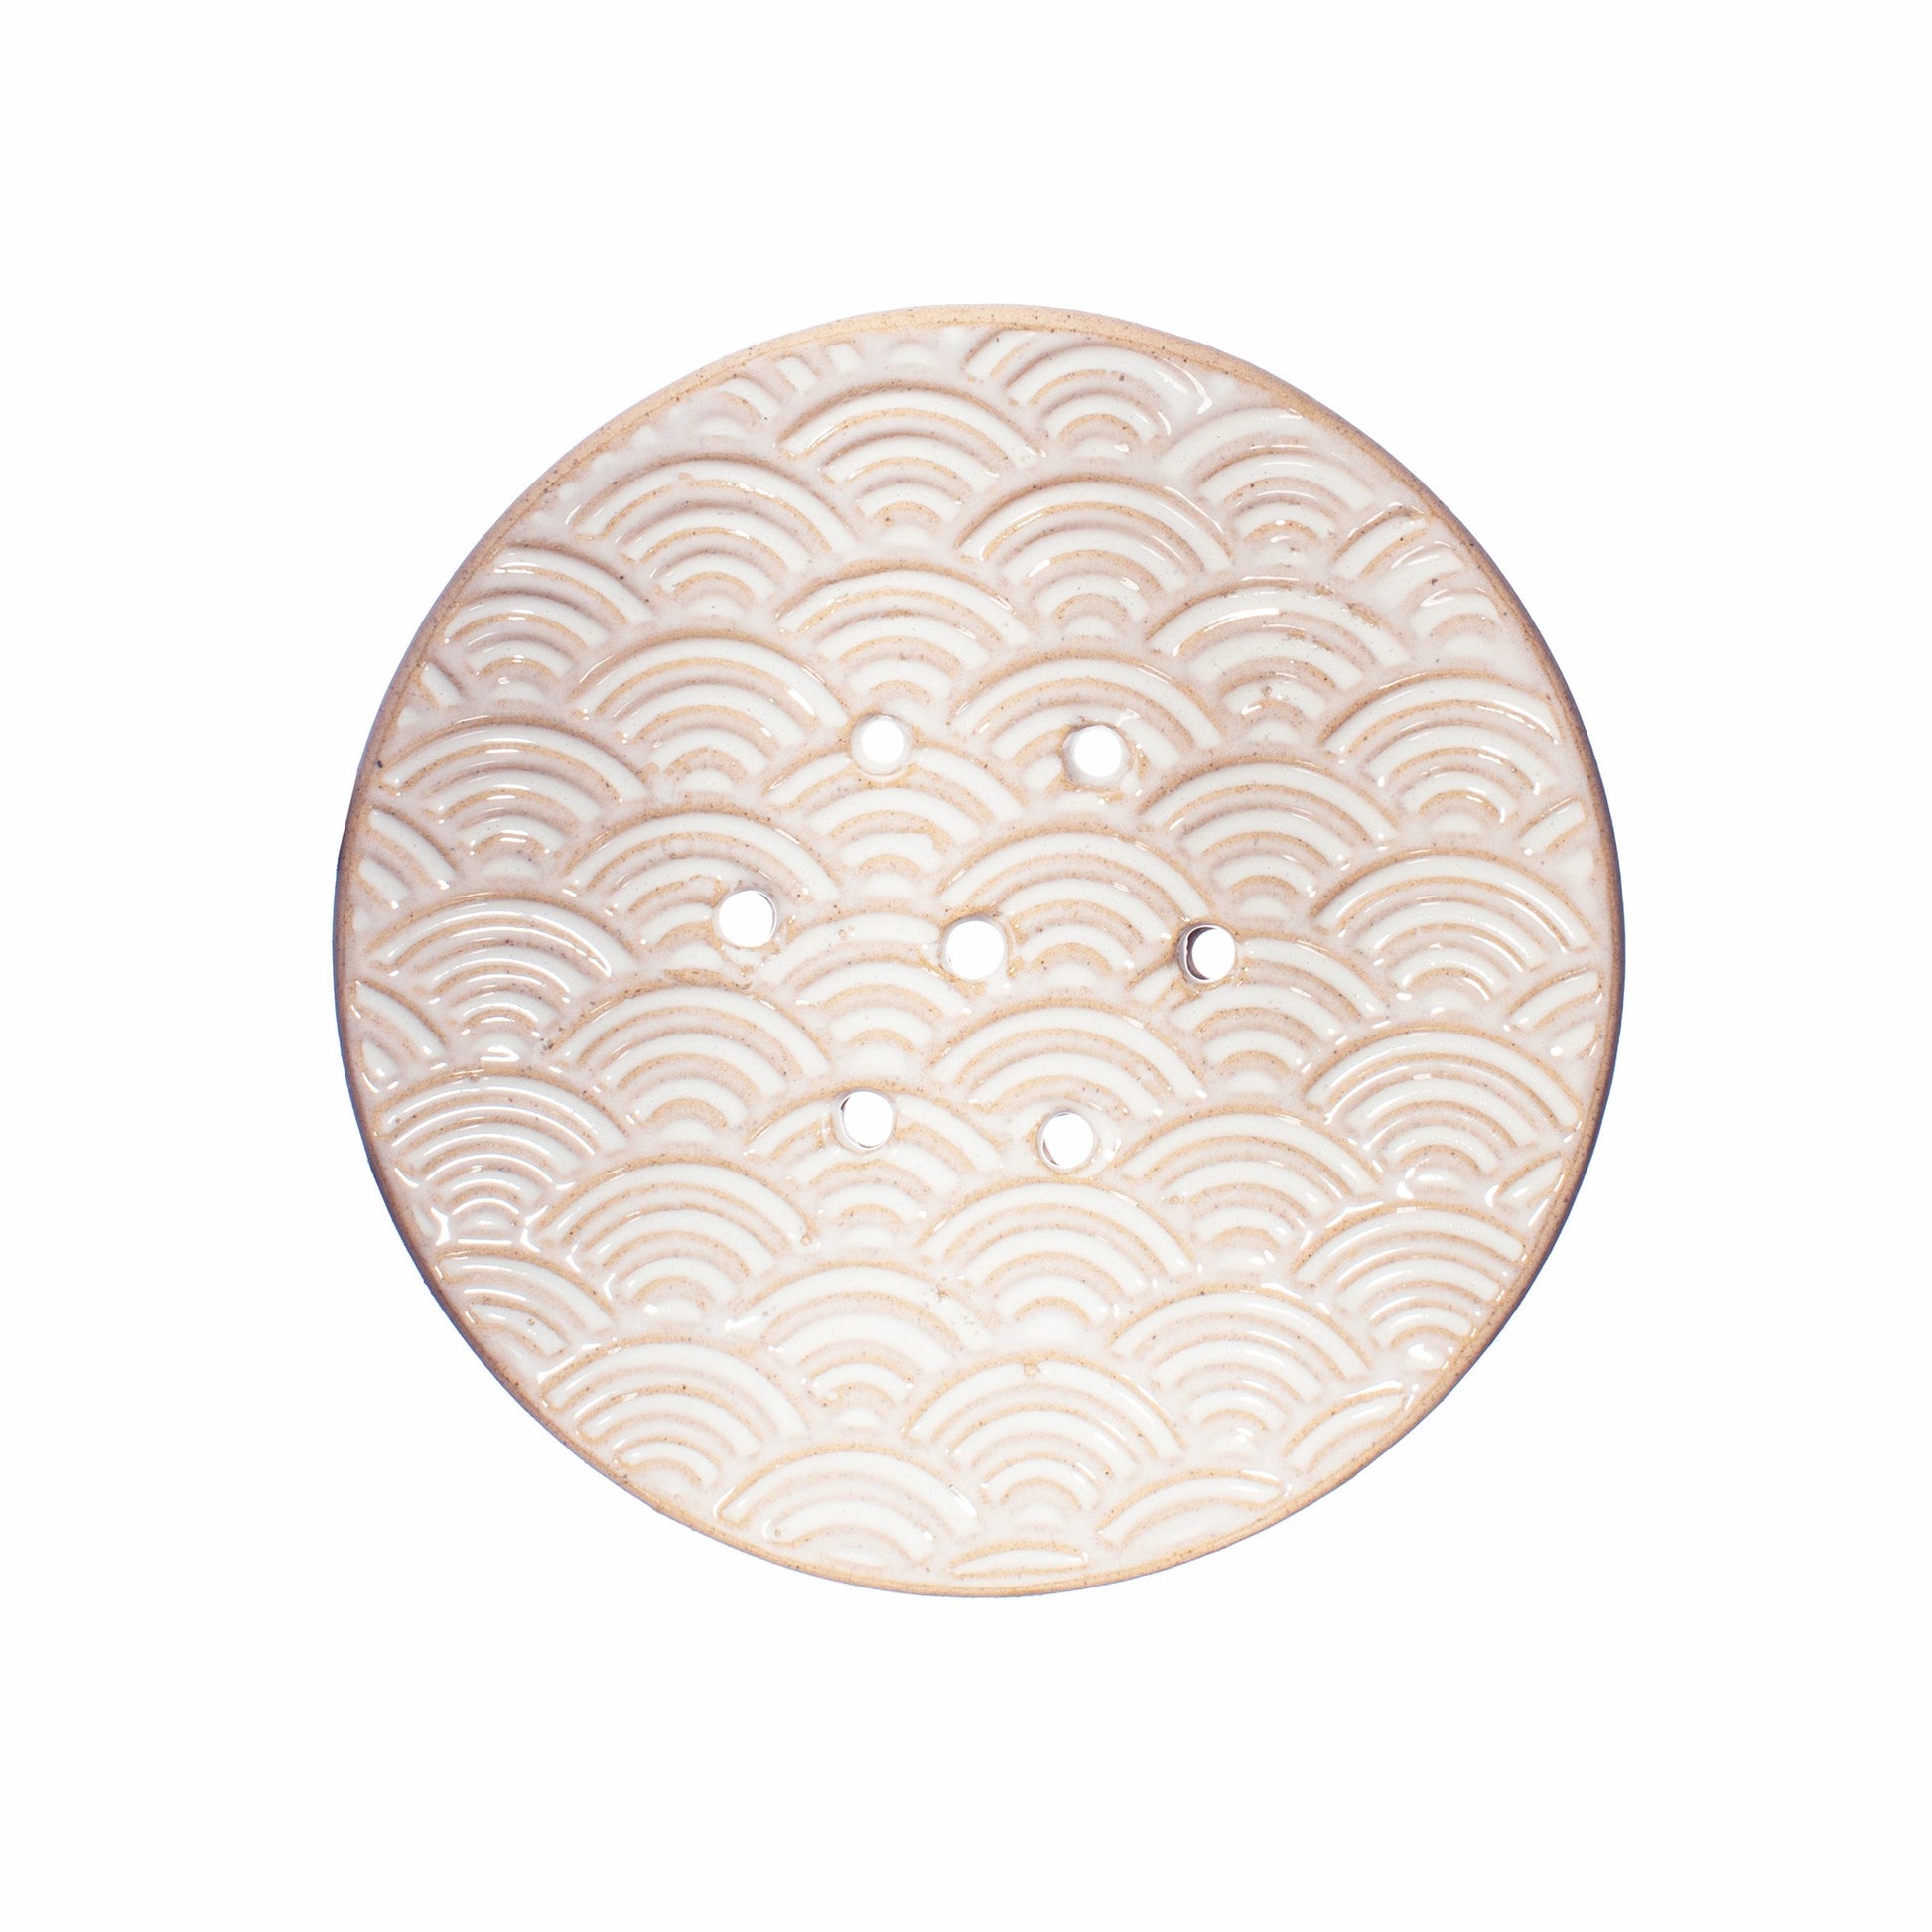 Japandi Seigaha Wave Pattern Soap Dish by Sass and Belle